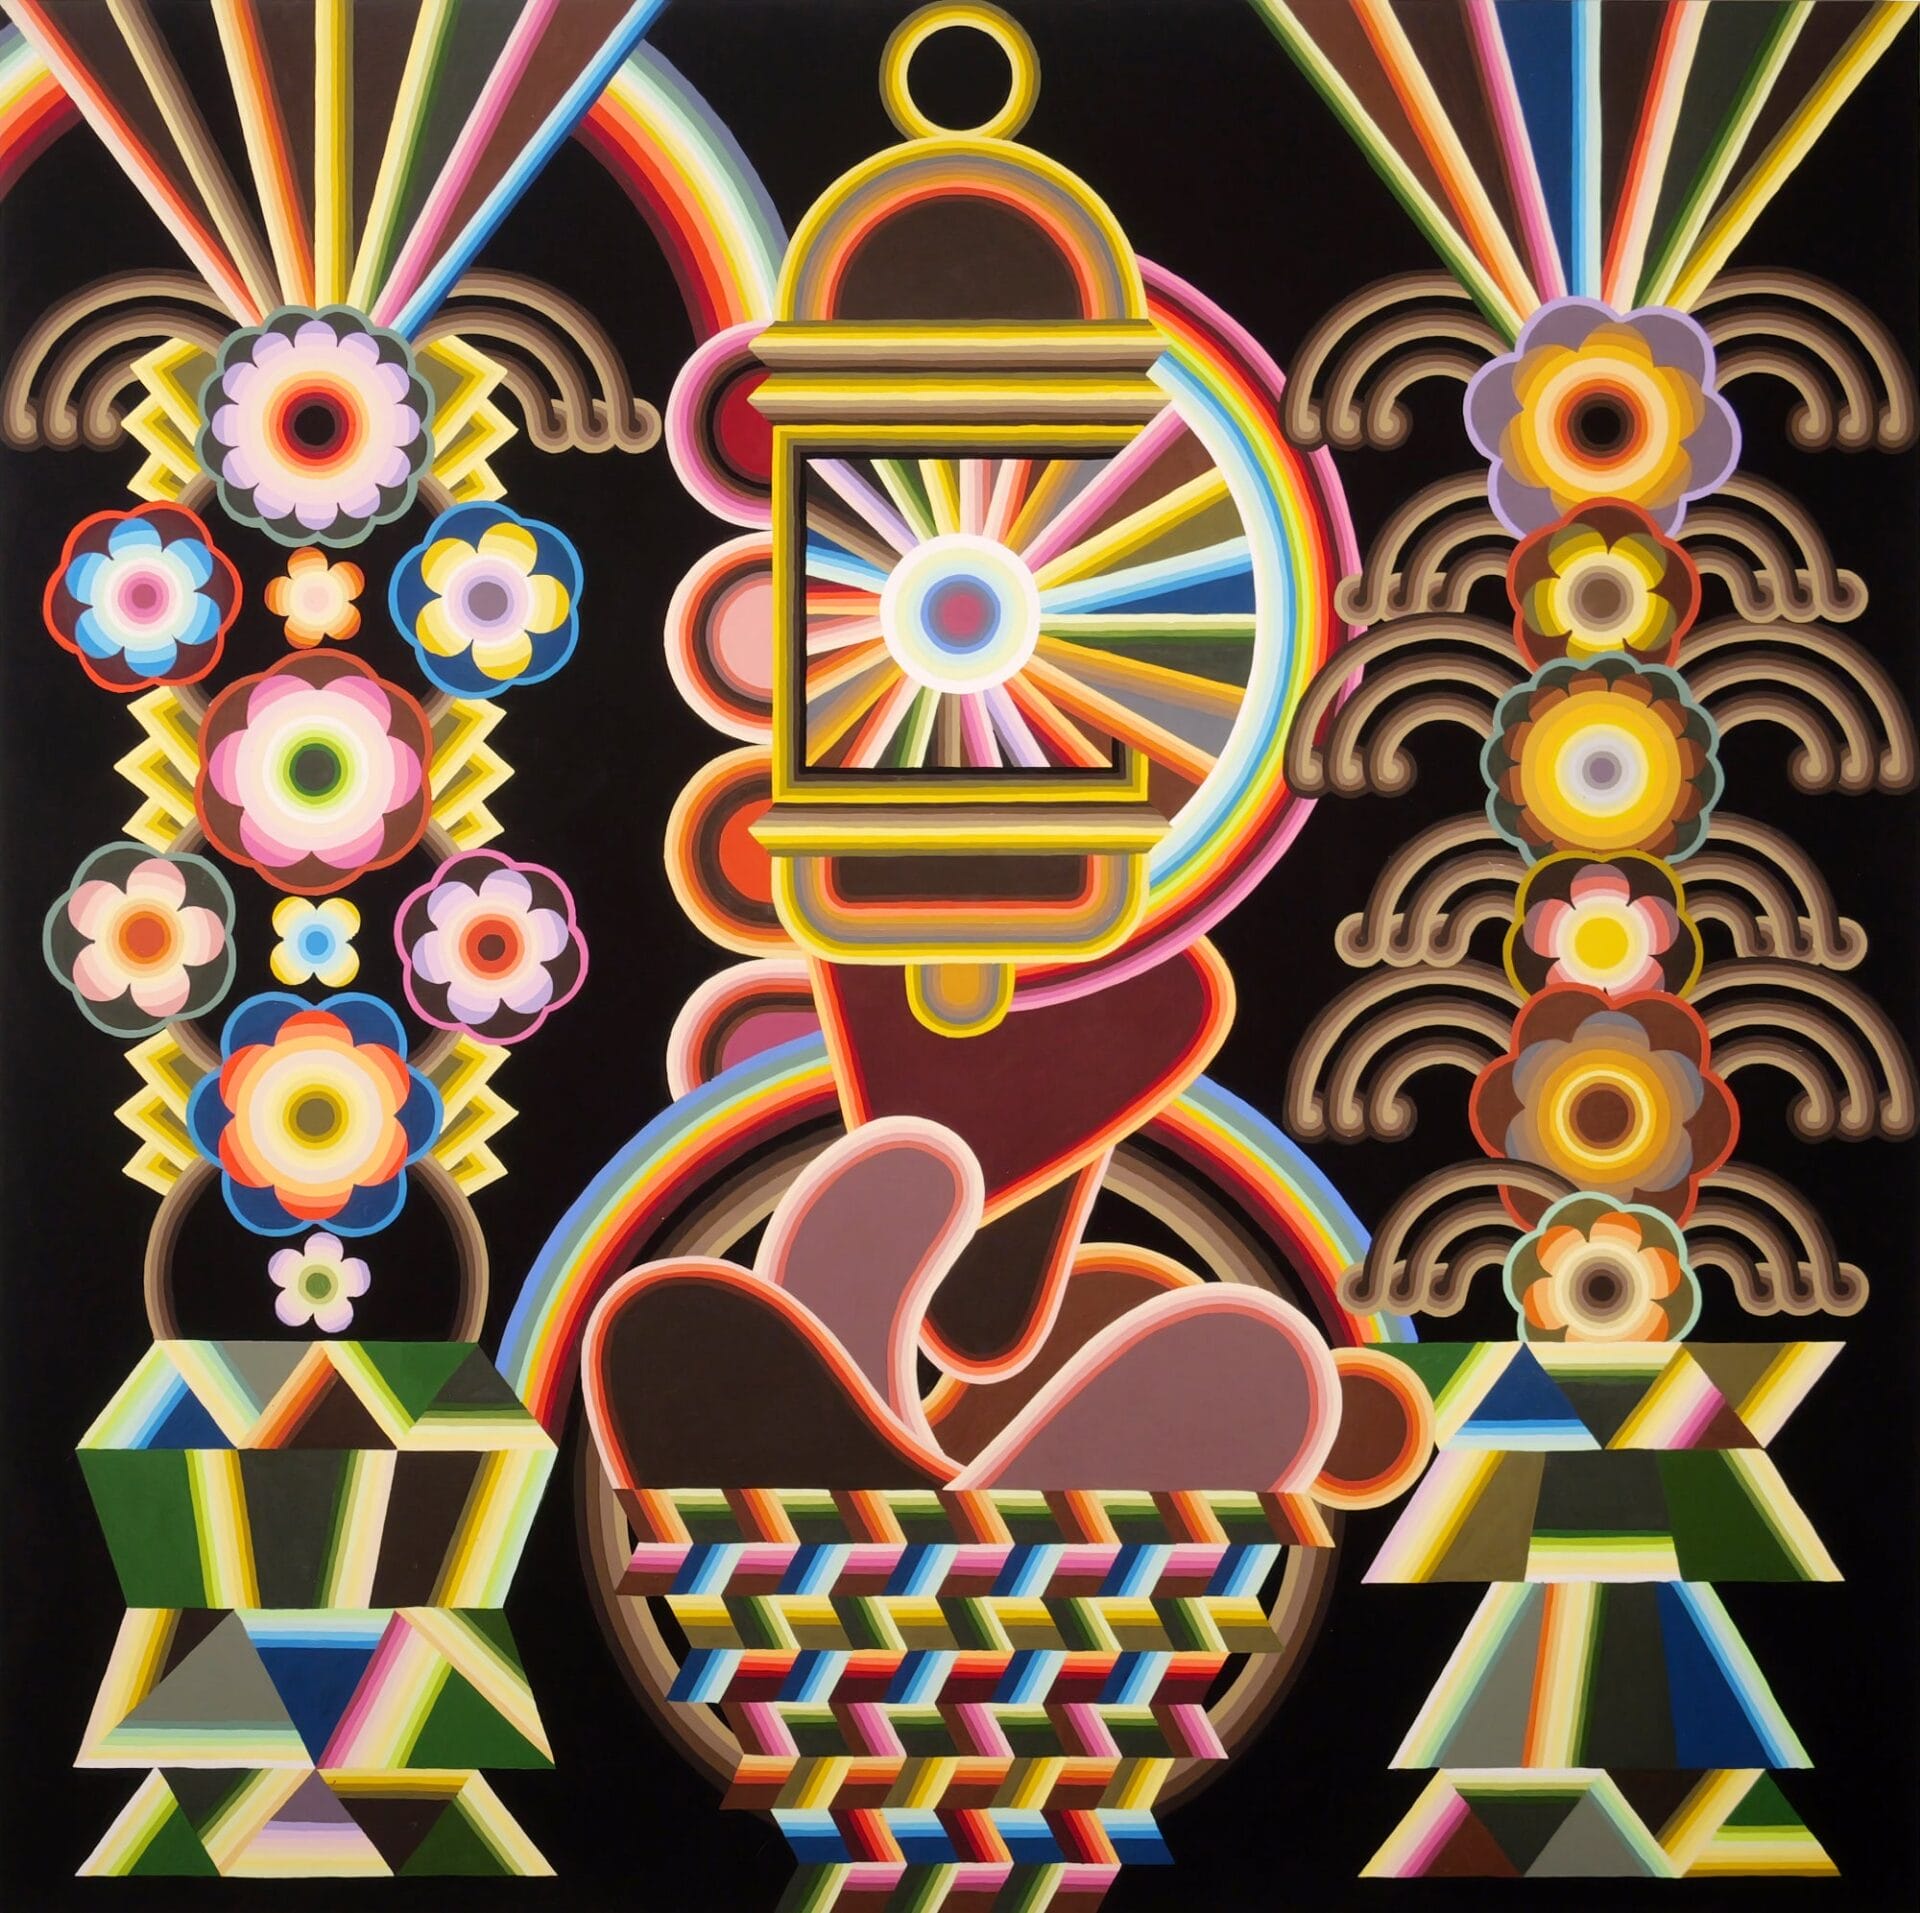 a painting with three pillars, the left and right are flowers and rays, and the center is a lantern with geometric elements. all on a black background